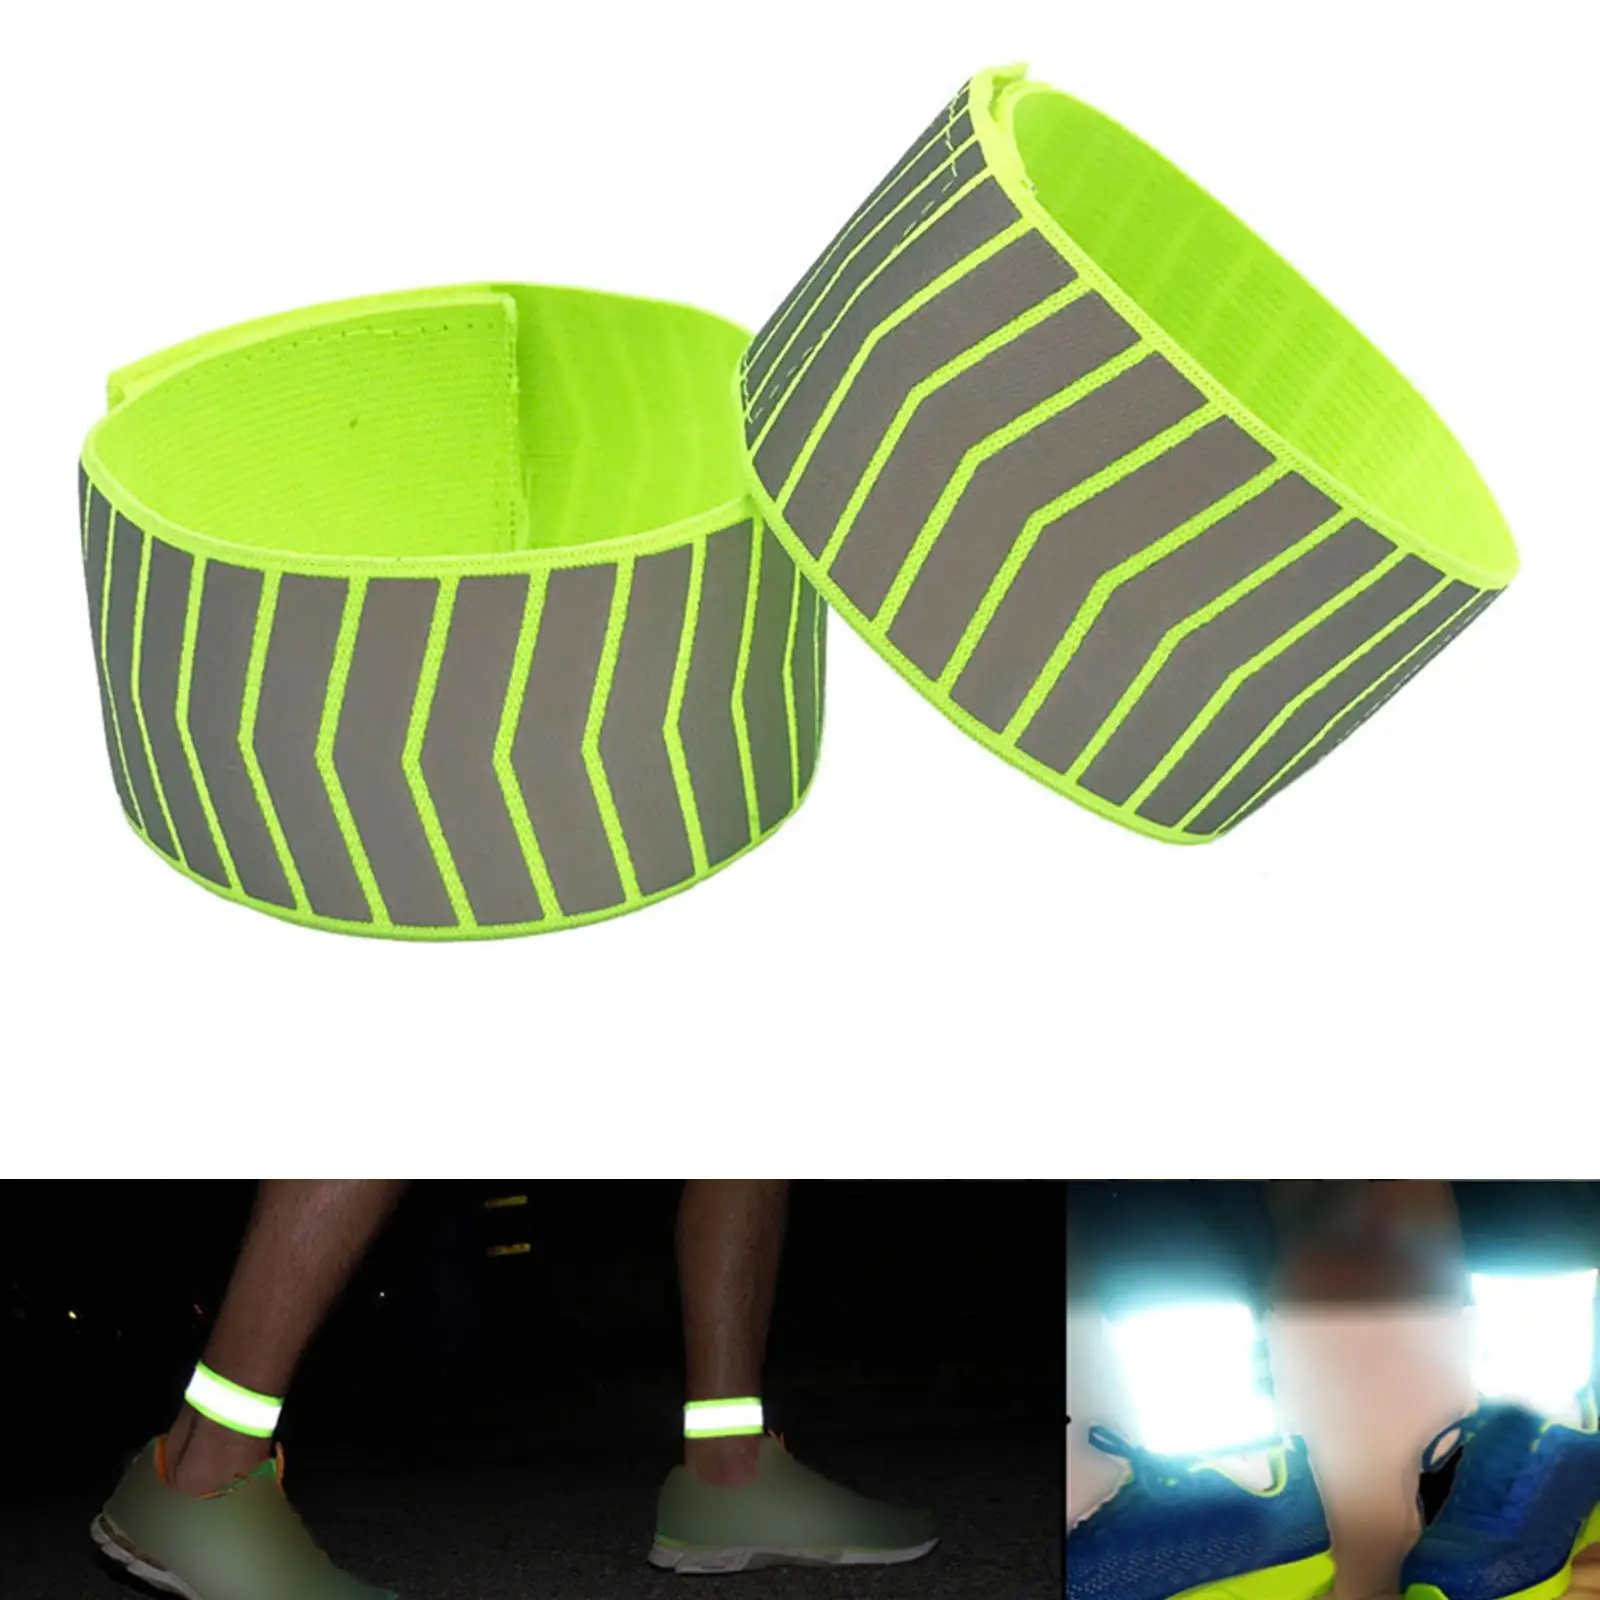 Reflective Safety Arm Band Light Up Cycling Jogging Running 